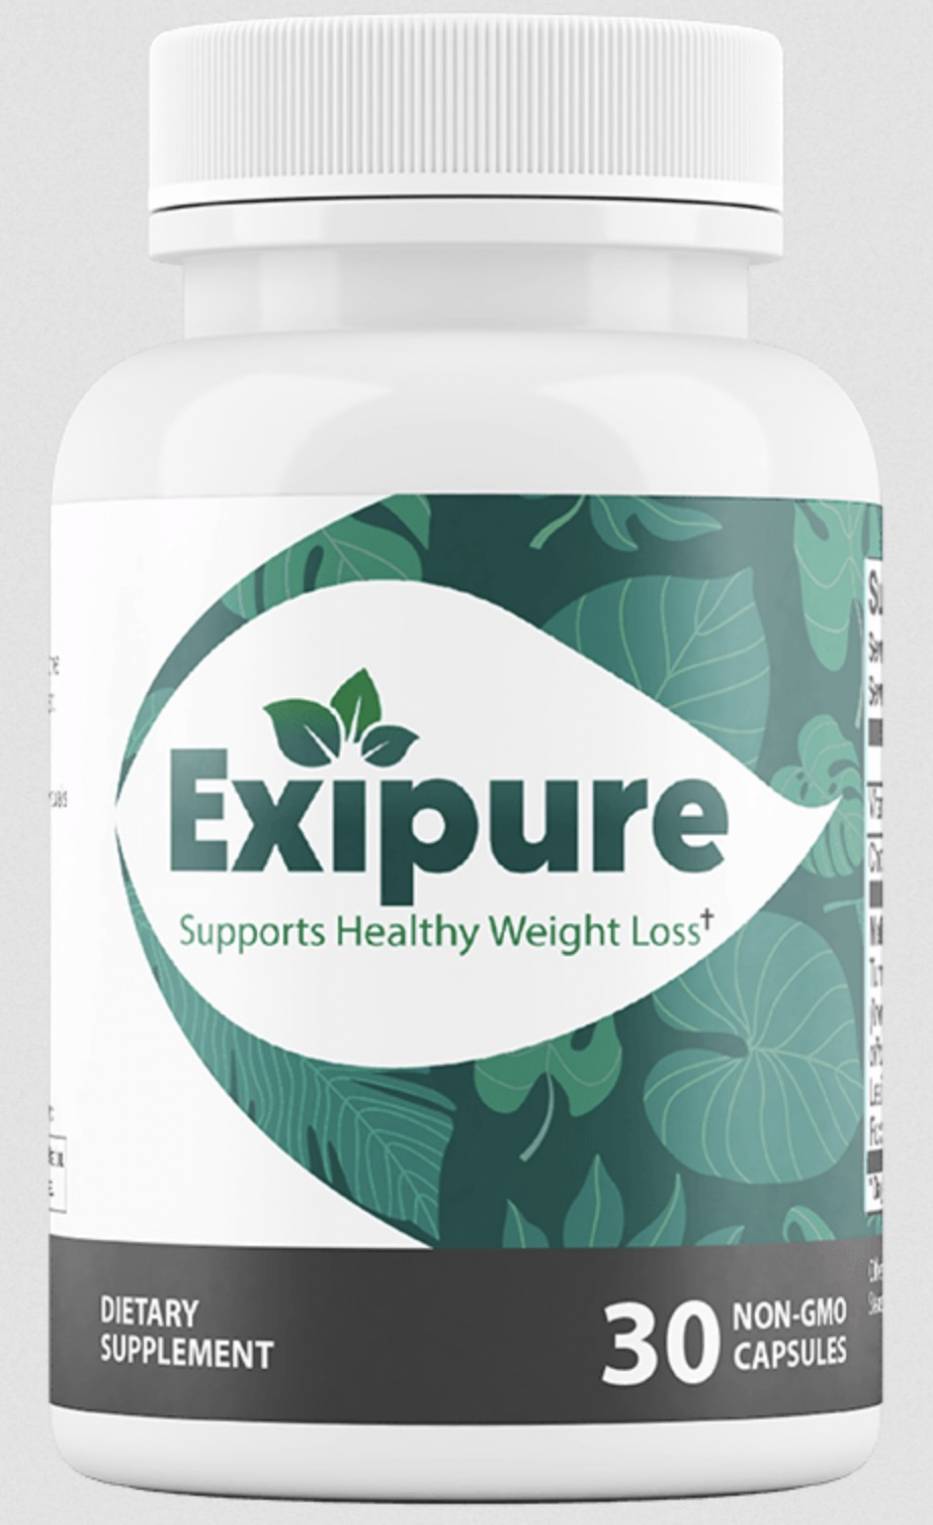 Exipure Negative Reviews From Customers